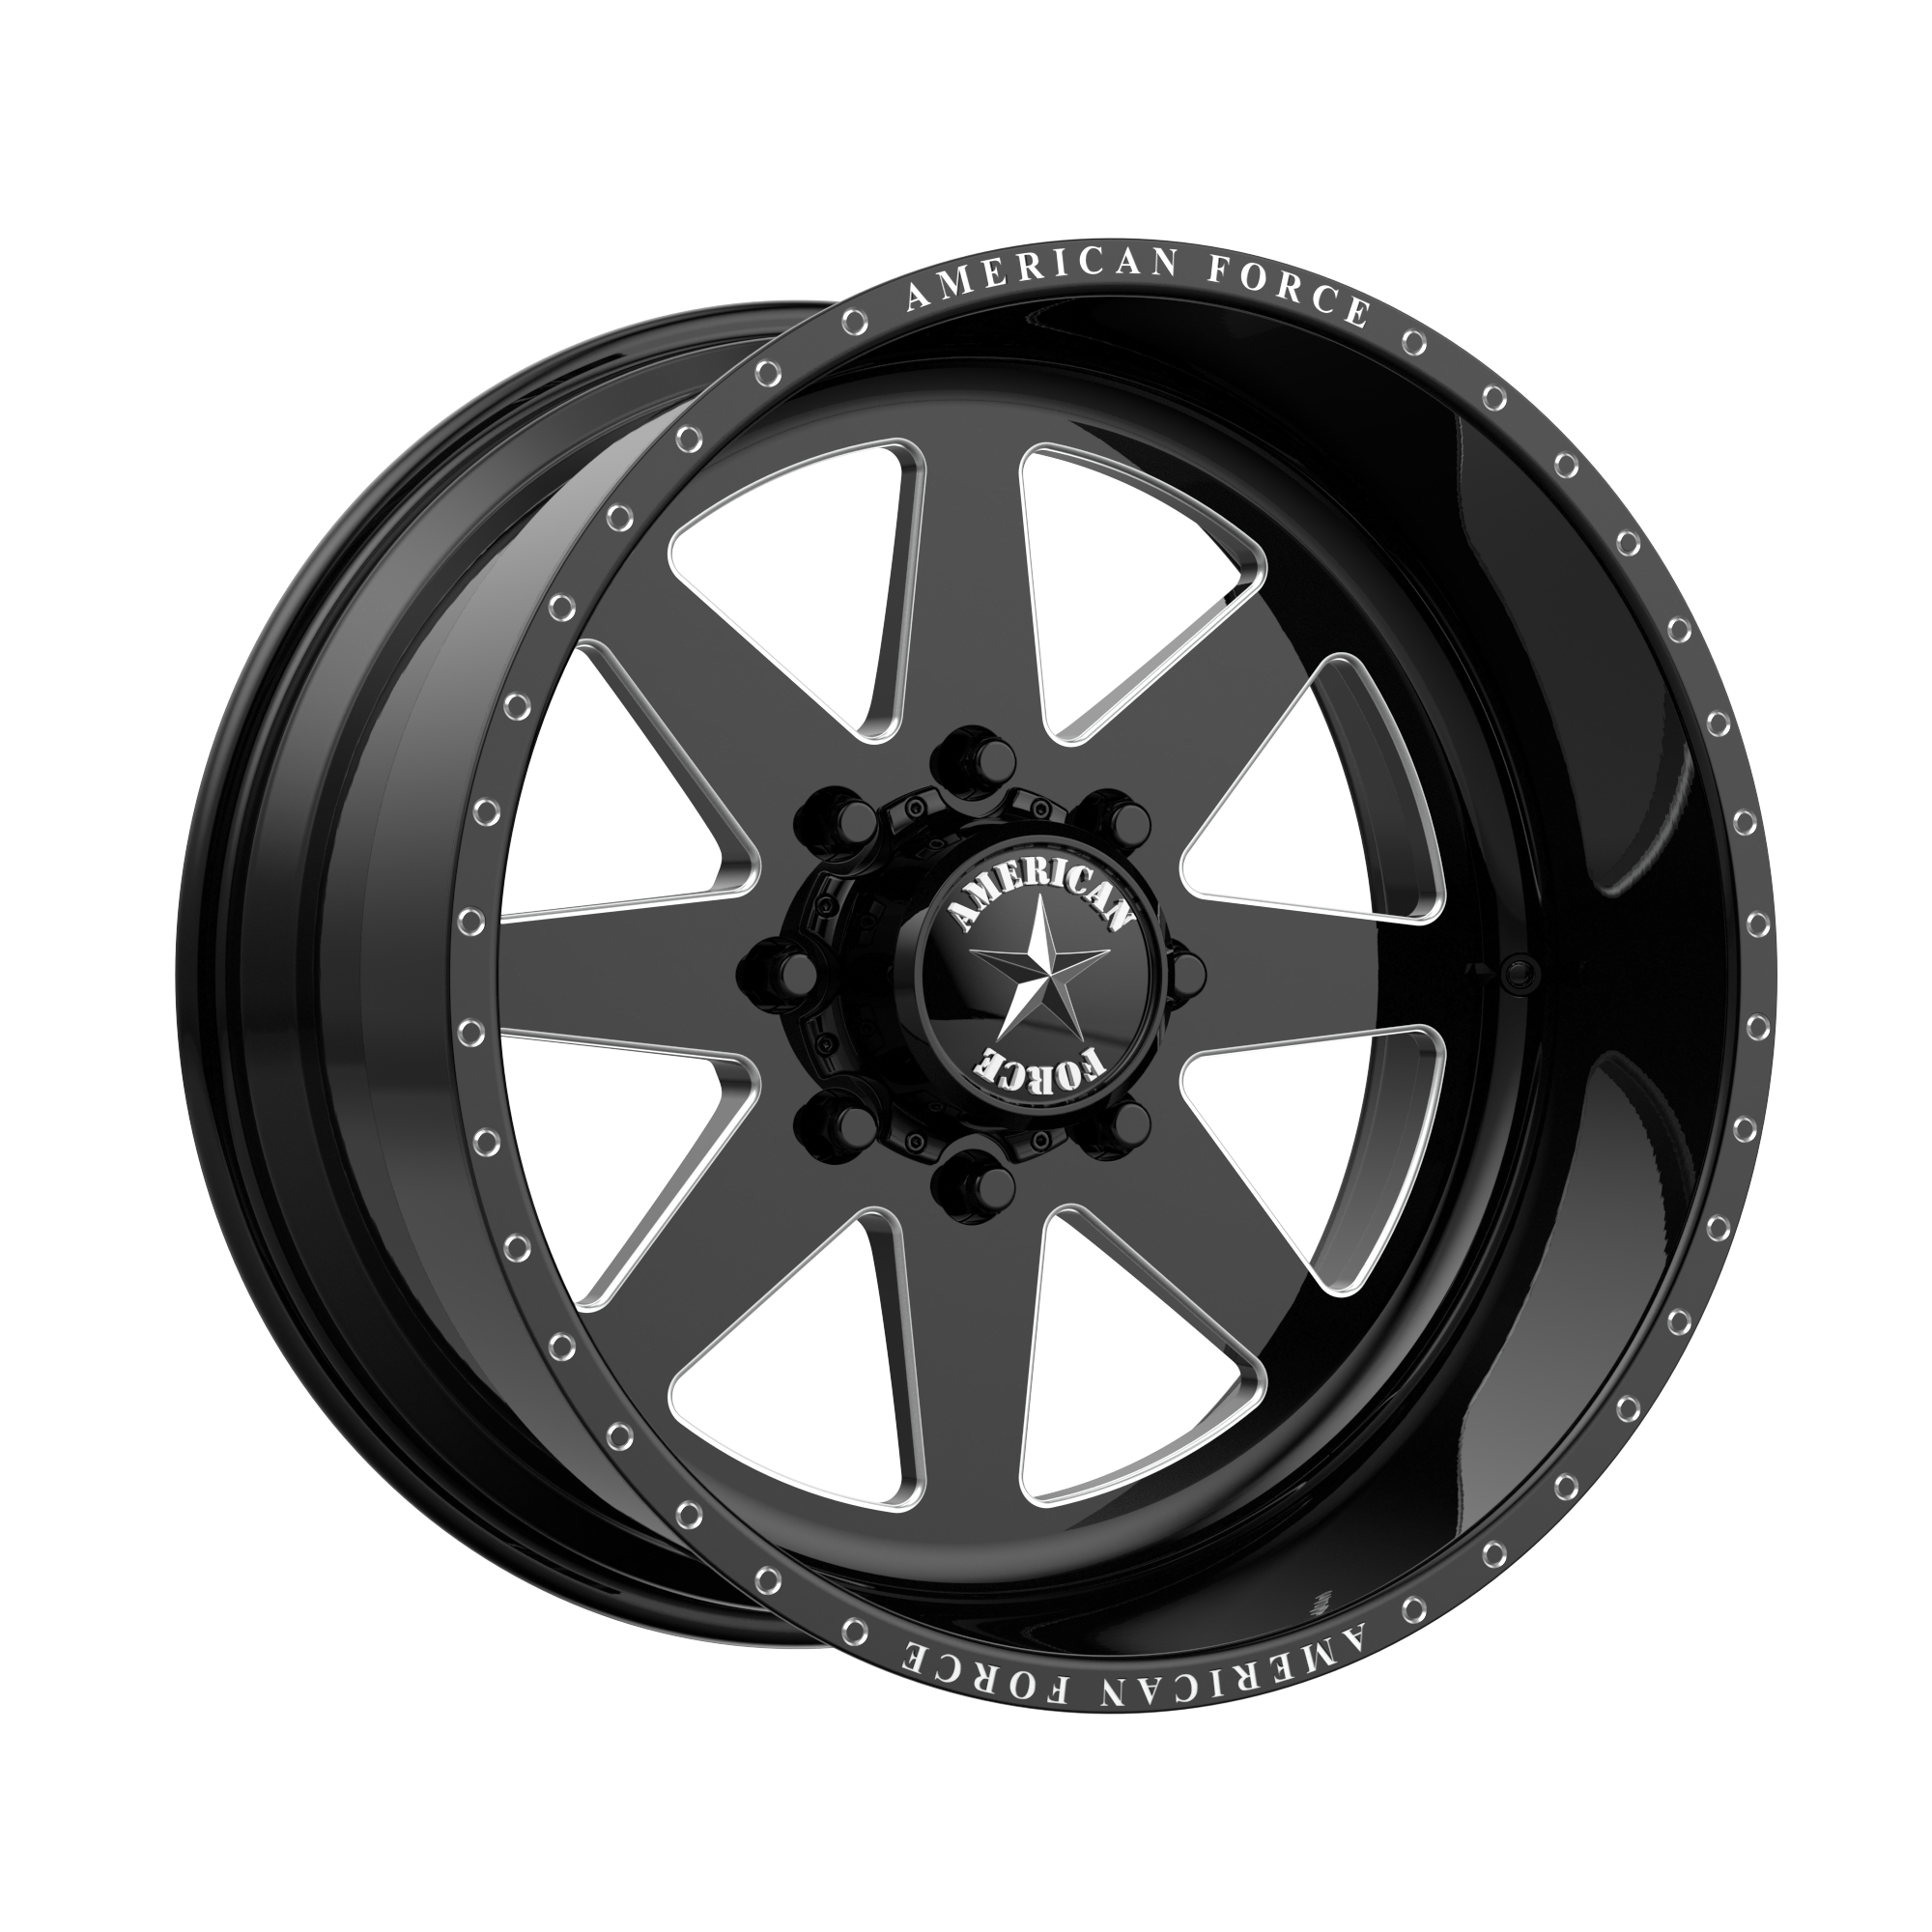 INDEPENDENCE SS 22x16 8x180.00 GLOSS BLACK MACHINED (-101 mm) - Tires and Engine Performance